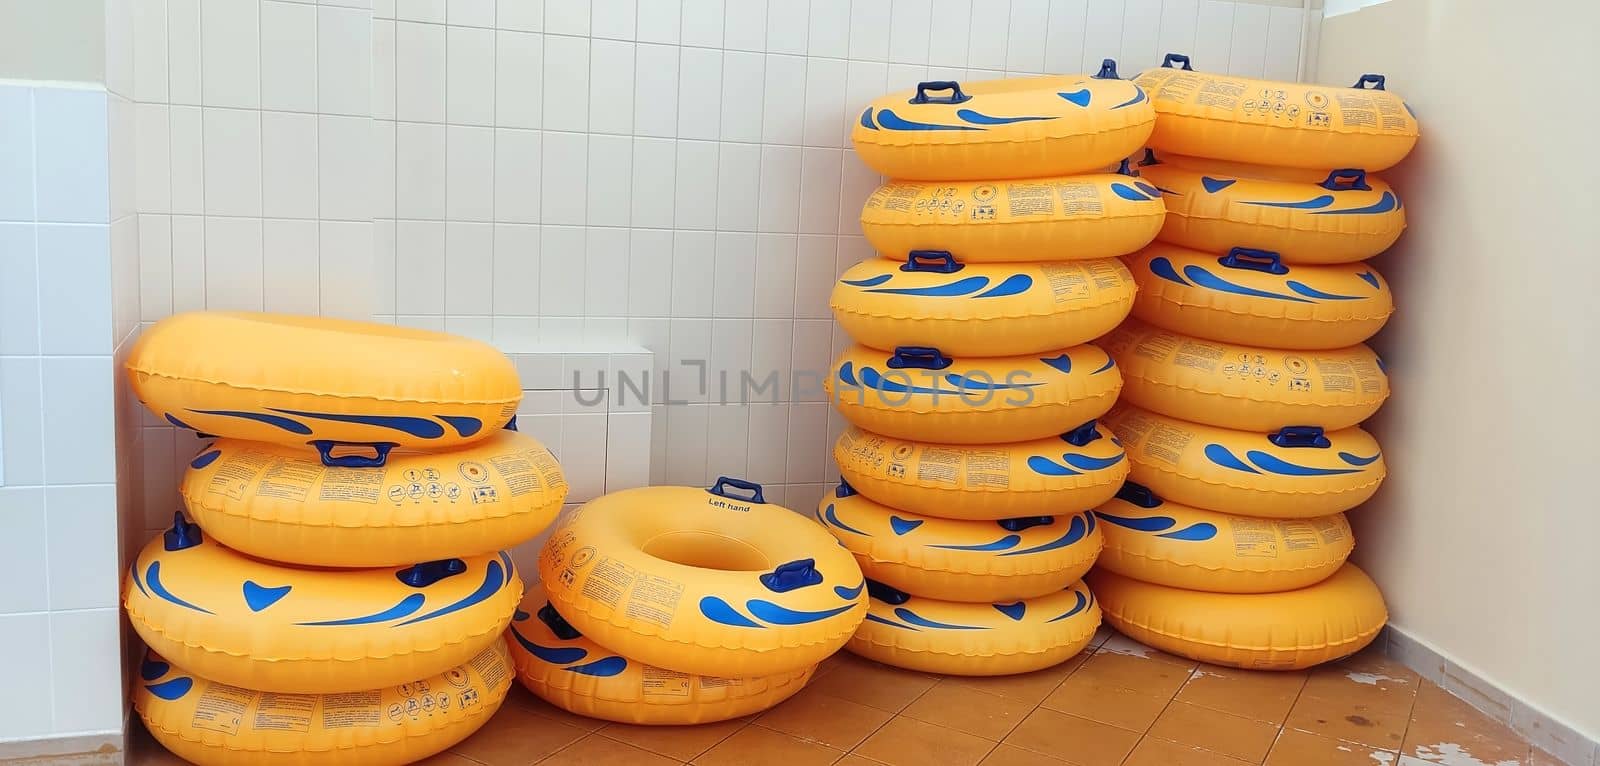 Stacks of yellow water tubes, lying near a light tiled wall.